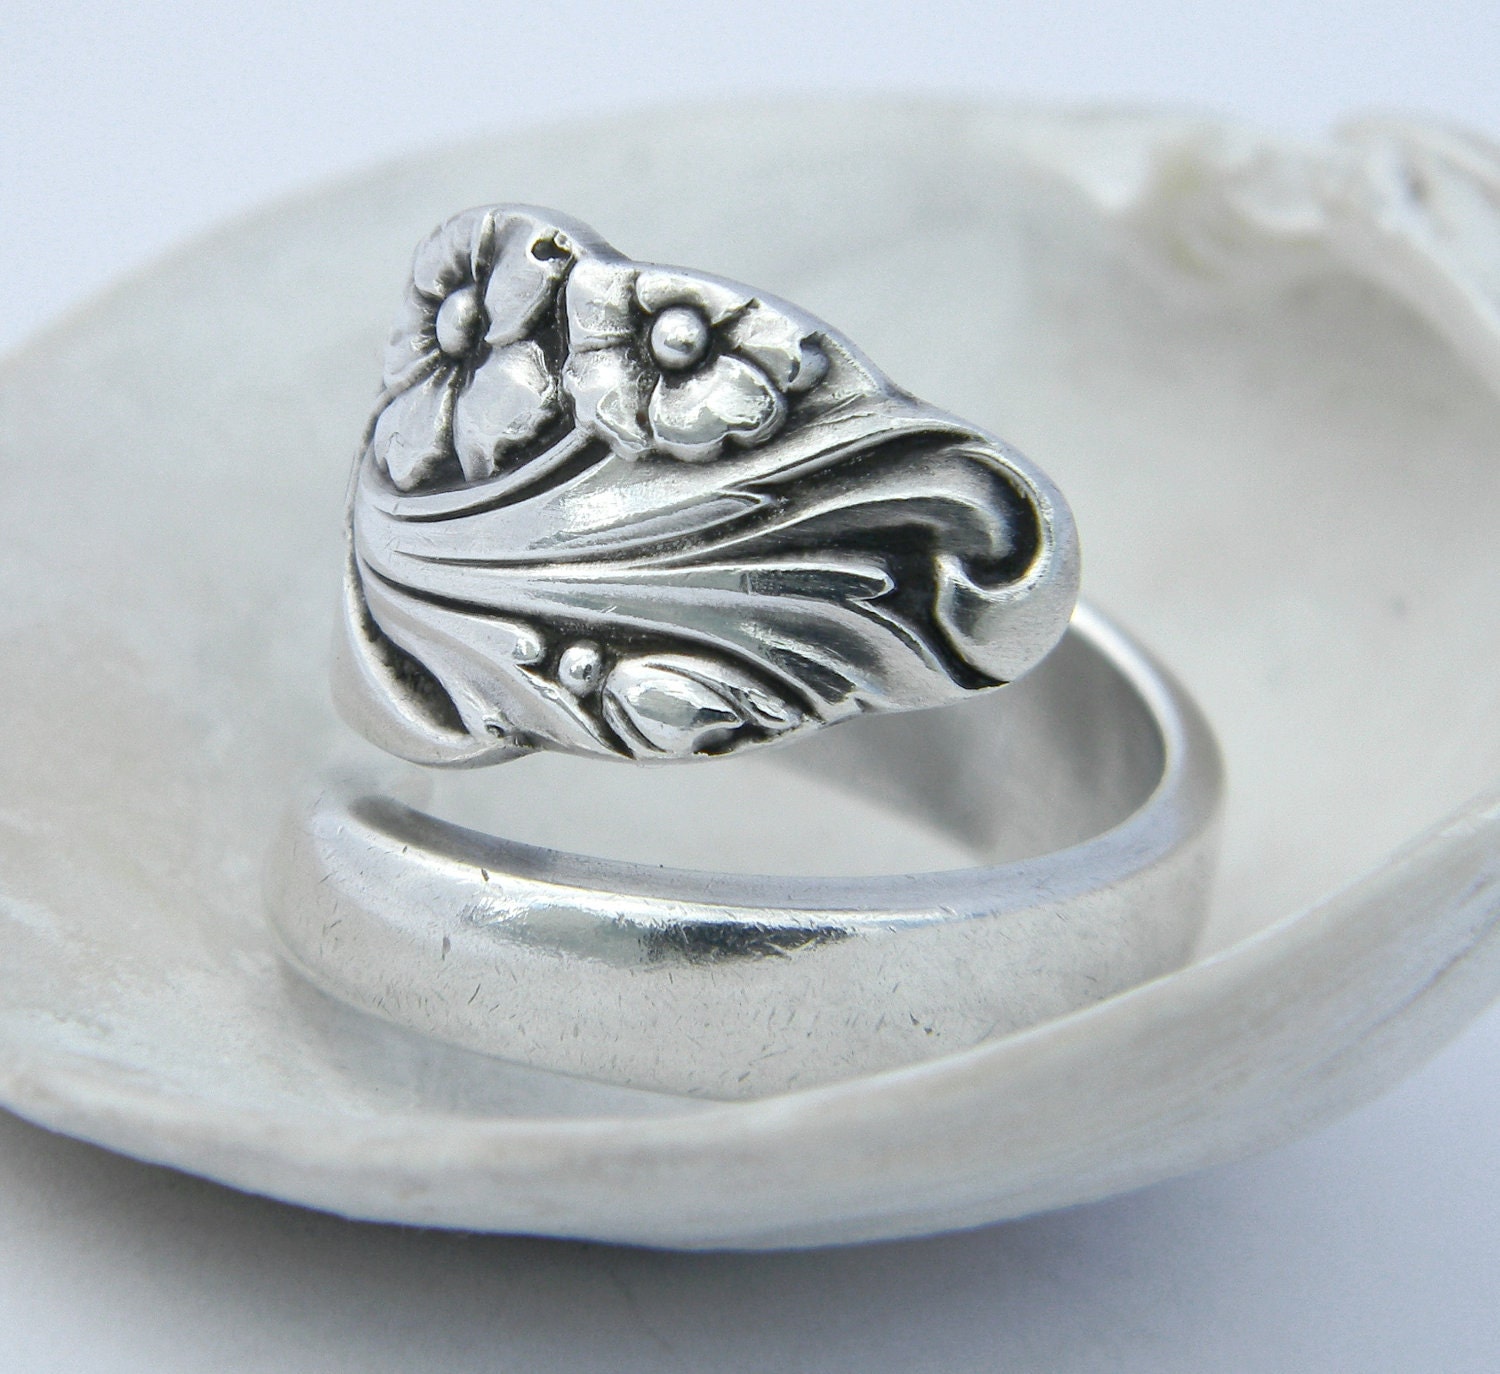 Antique Spoon Ring  - Evening Star 1950- Silverware Jewelry